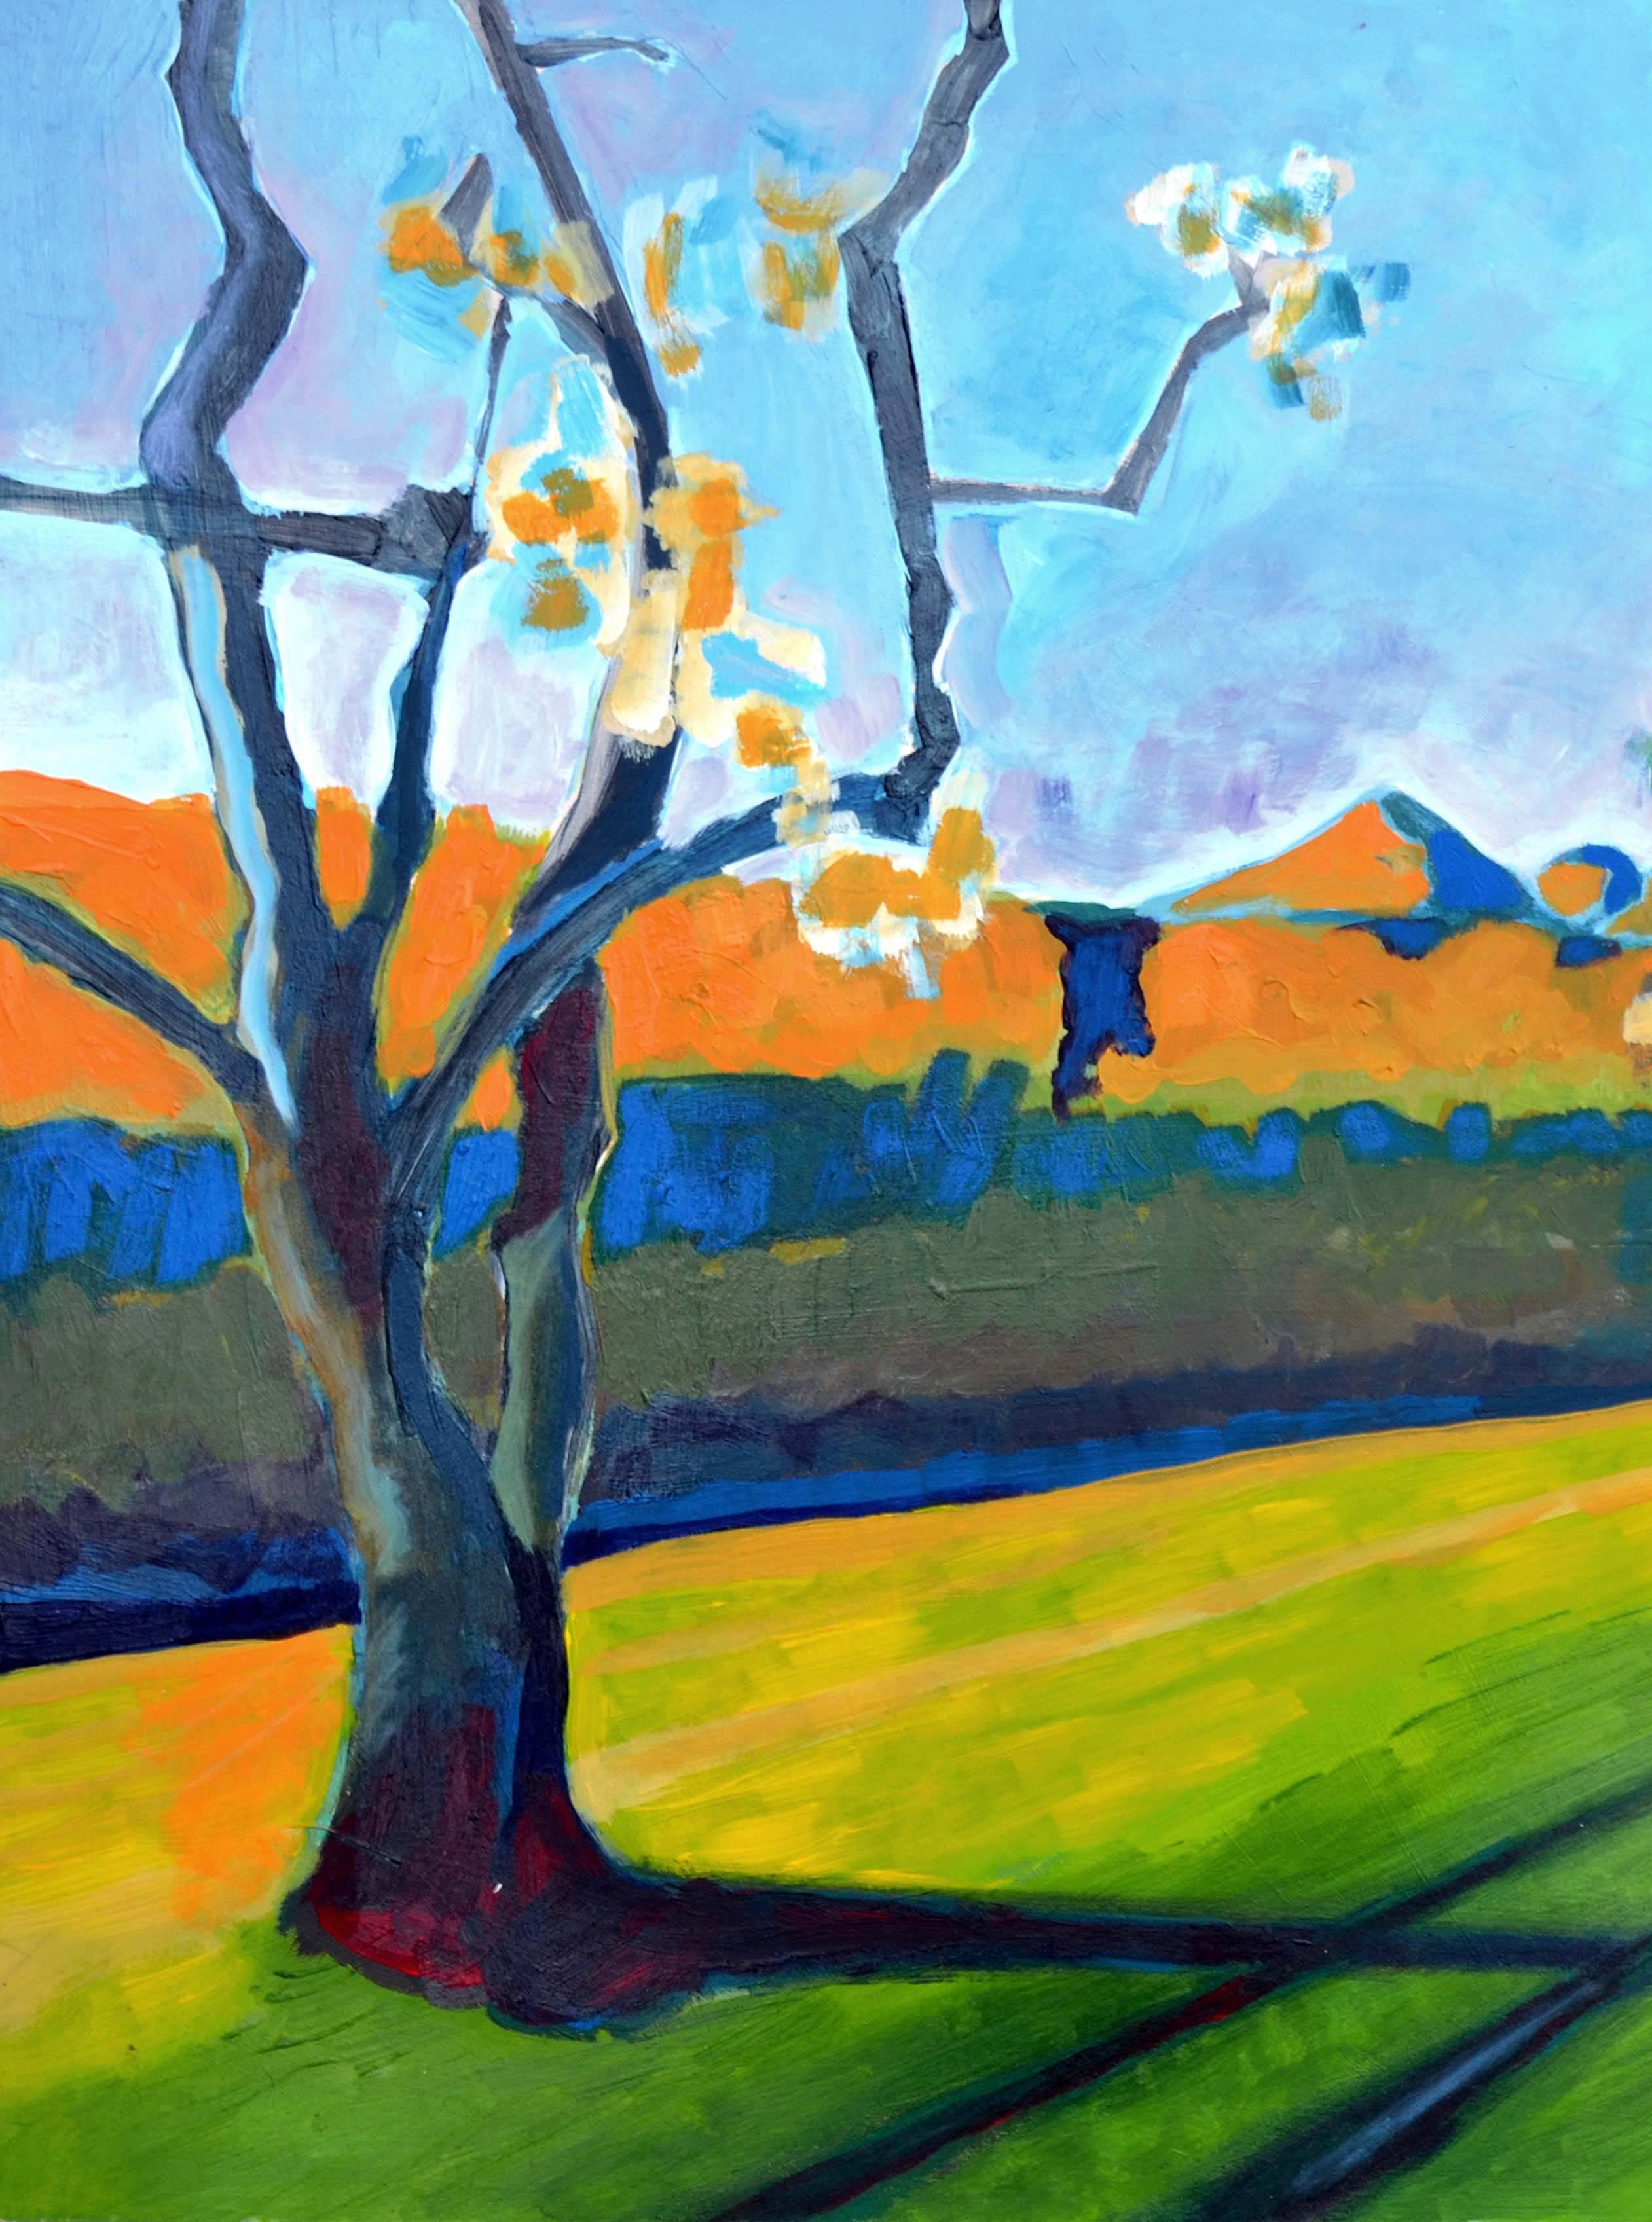 Modern Contemporary Fauvist Autumnal Landscape - Painting by Michael Eggleston